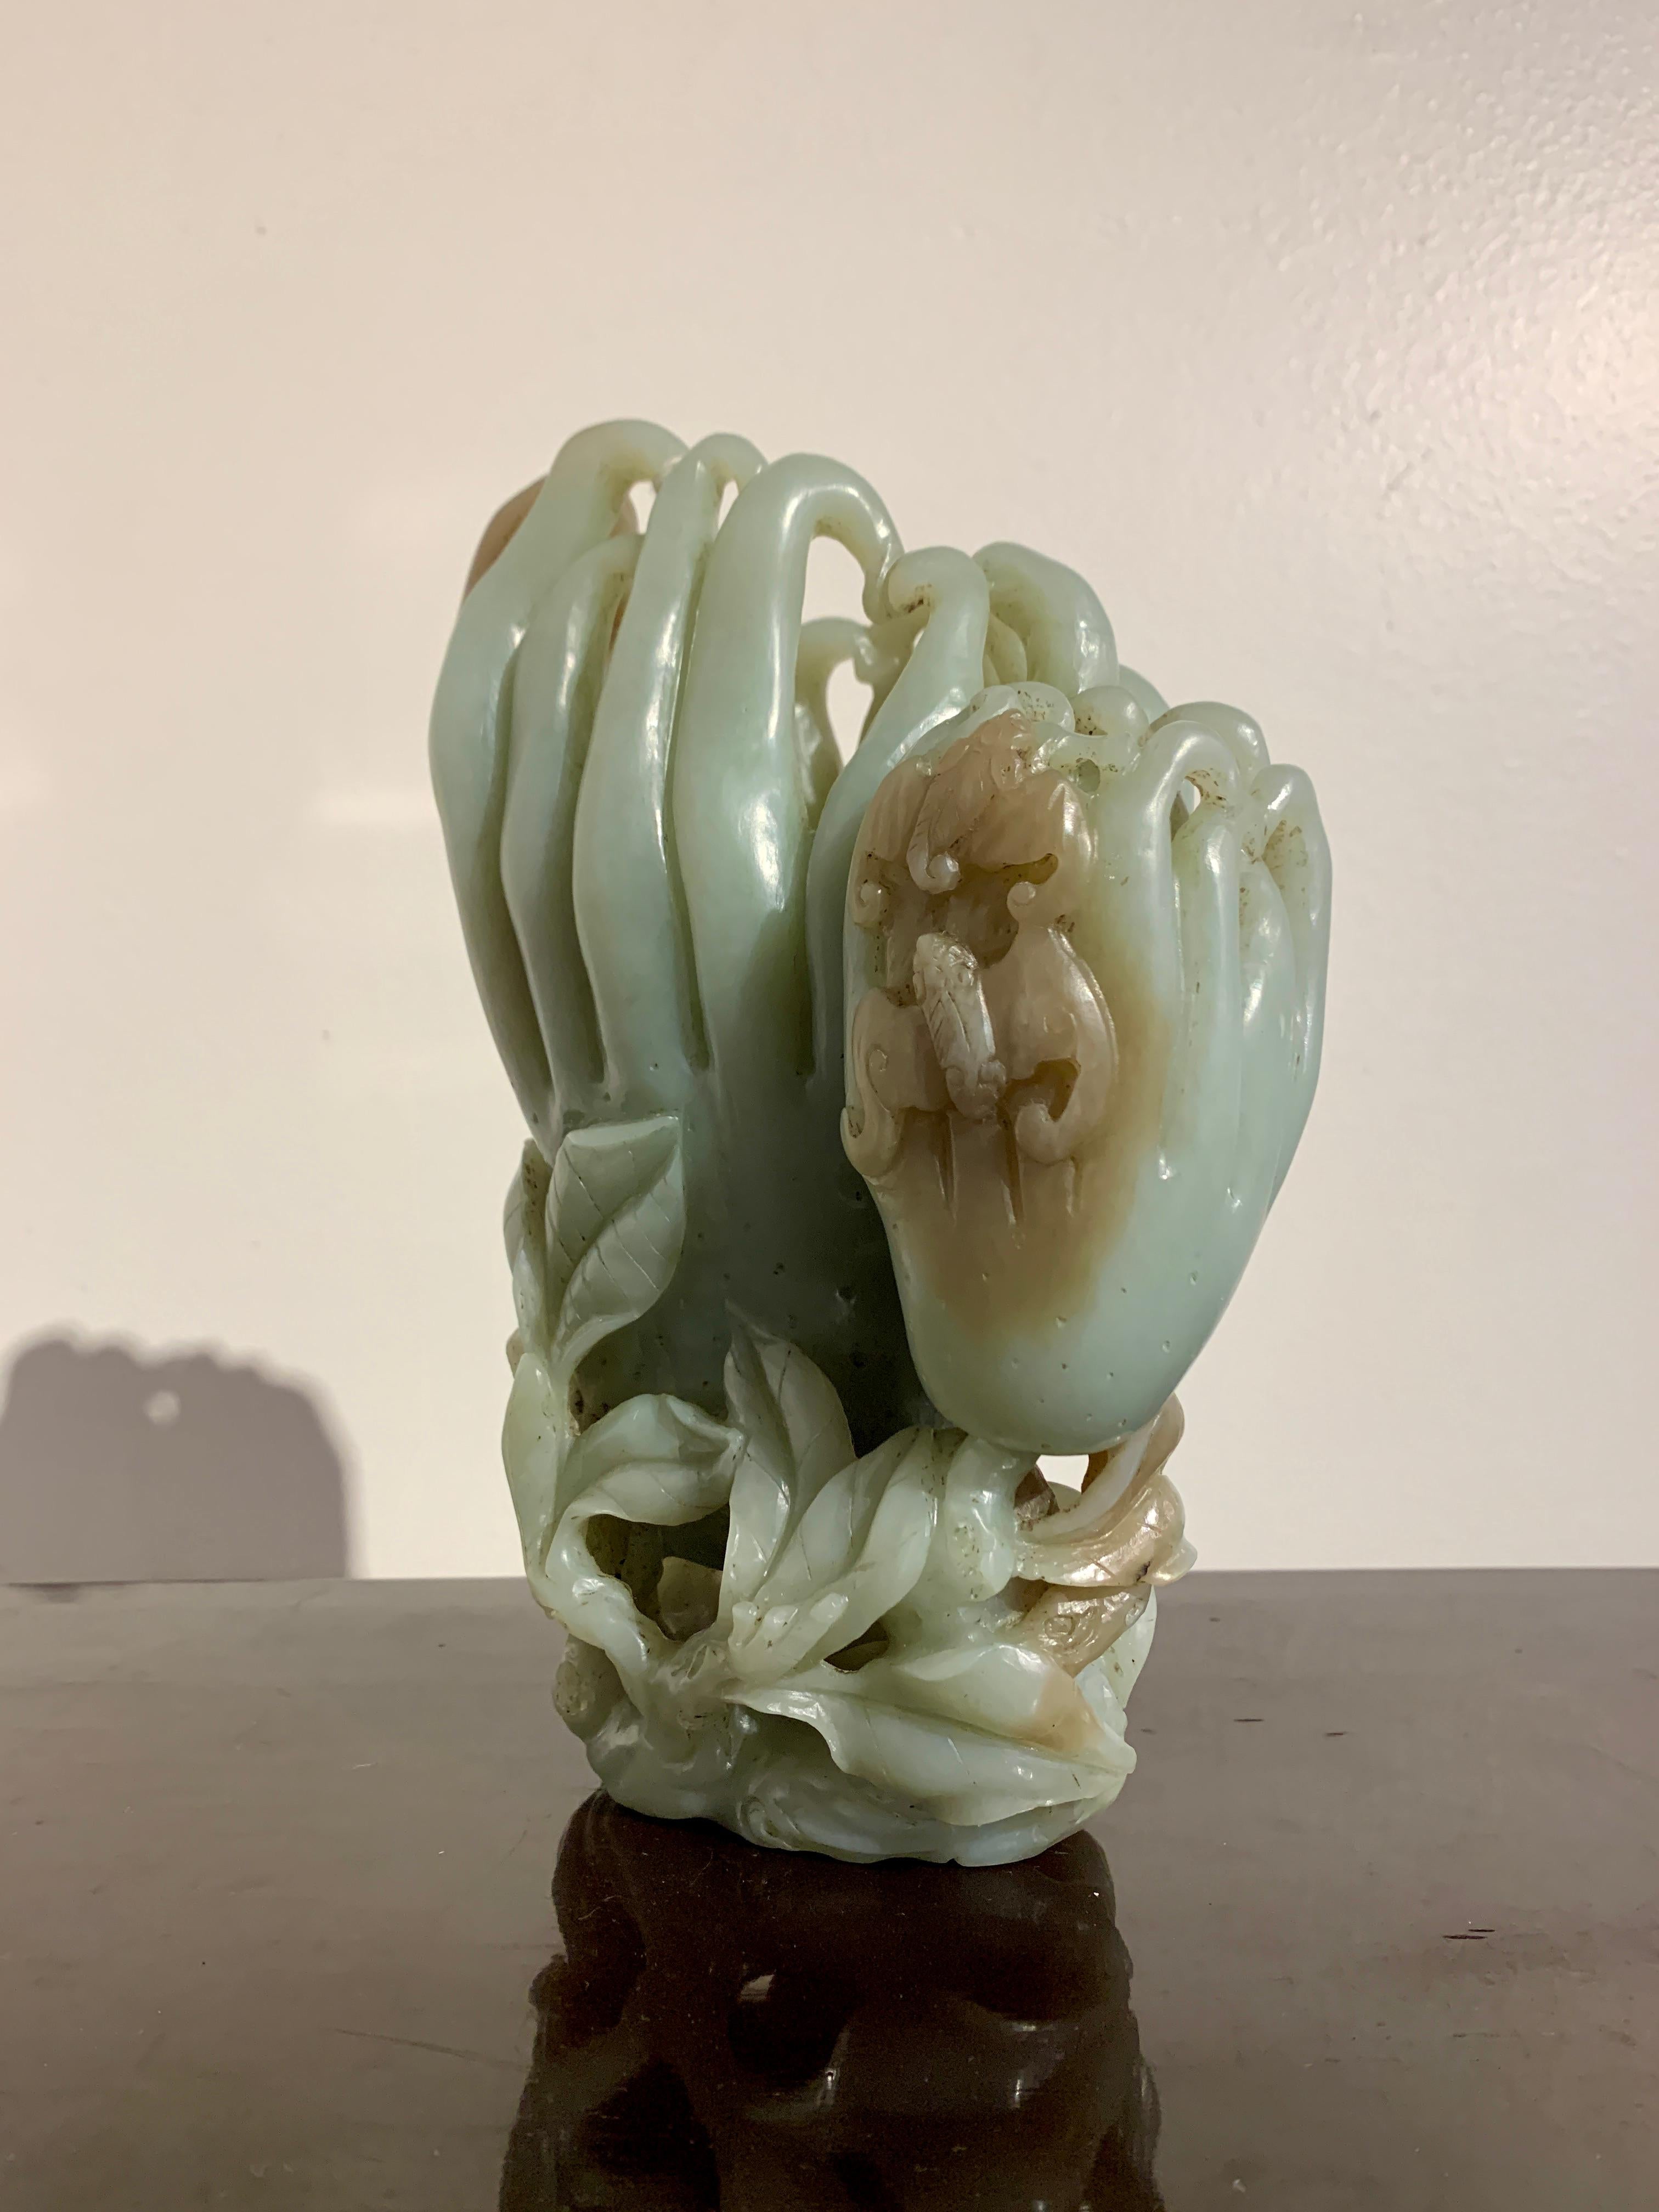 A large and graceful carved nephrite jade conjoined double vase in the form of a pair of Buddha's hands fruit (finger citron), late Qing Dynasty, circa 1900, China.

The large and heavy vase carved from a single piece of celadon nephrite jade,